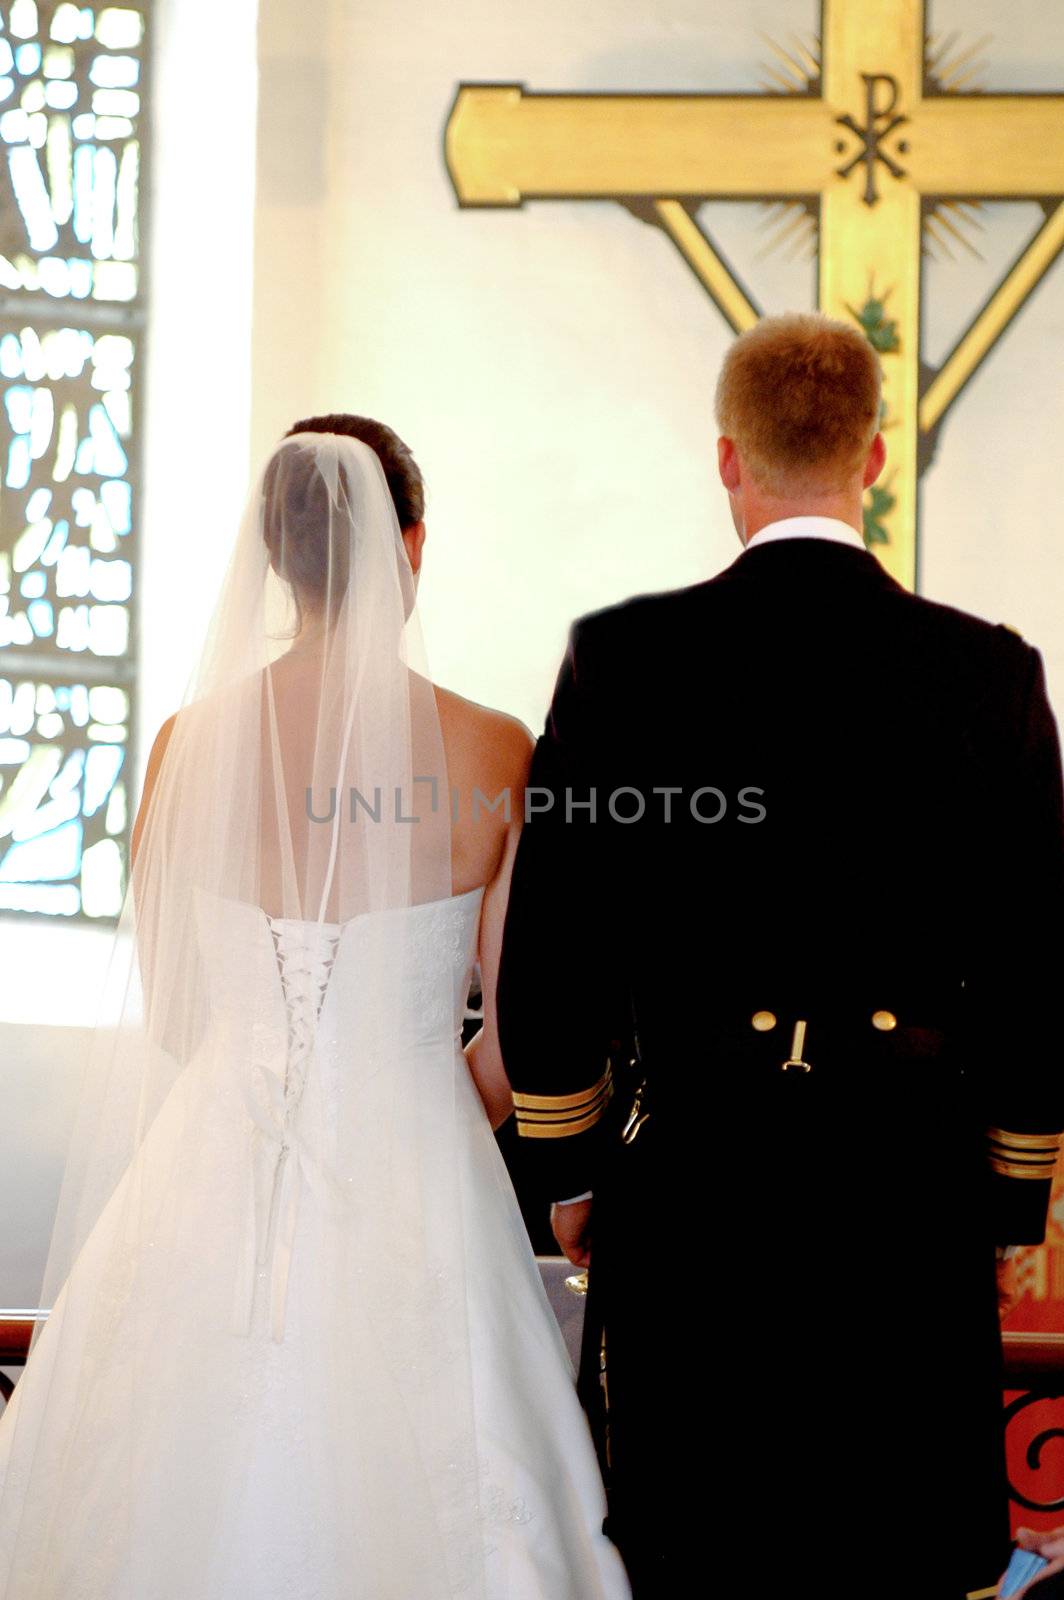 Wedding couple. The wedding couple is standing in front of a cross in church.